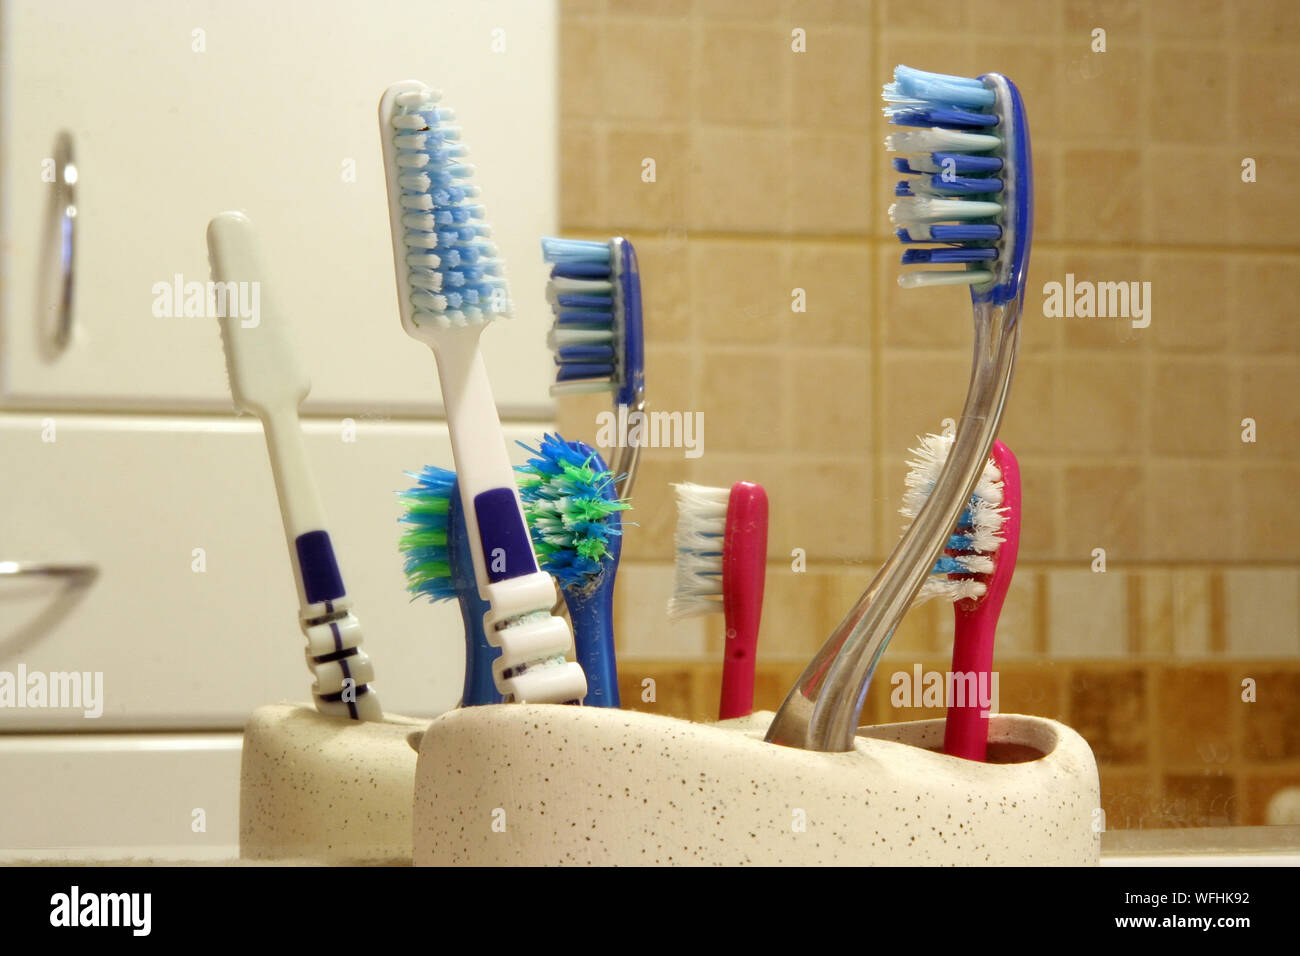 Family toothbrushes in front of mirror. Used toothbrushes. Stock Photo